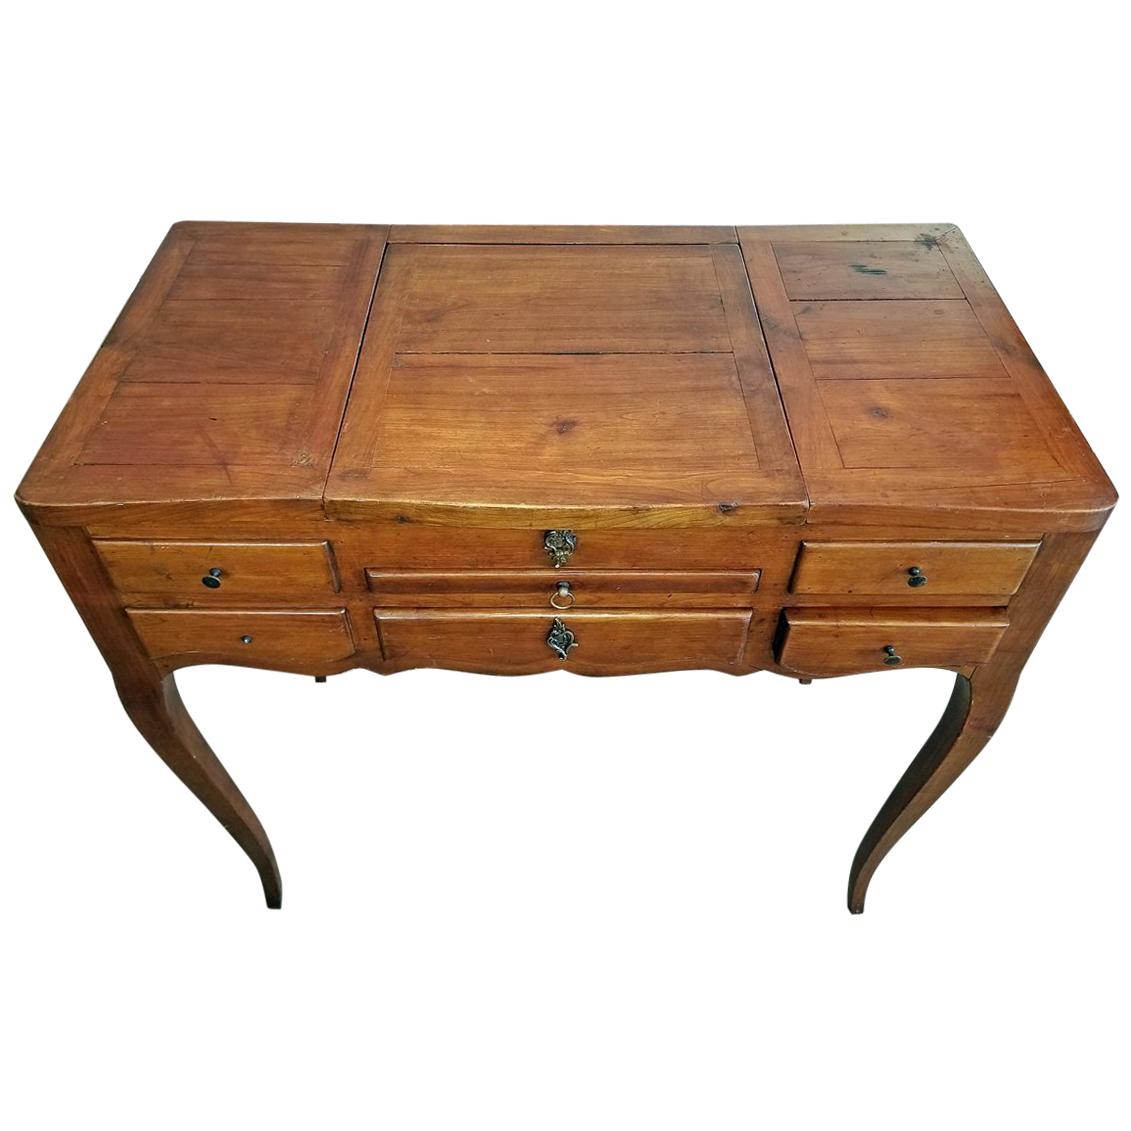 18th Century French Provincial Cherrywood Poudreuse